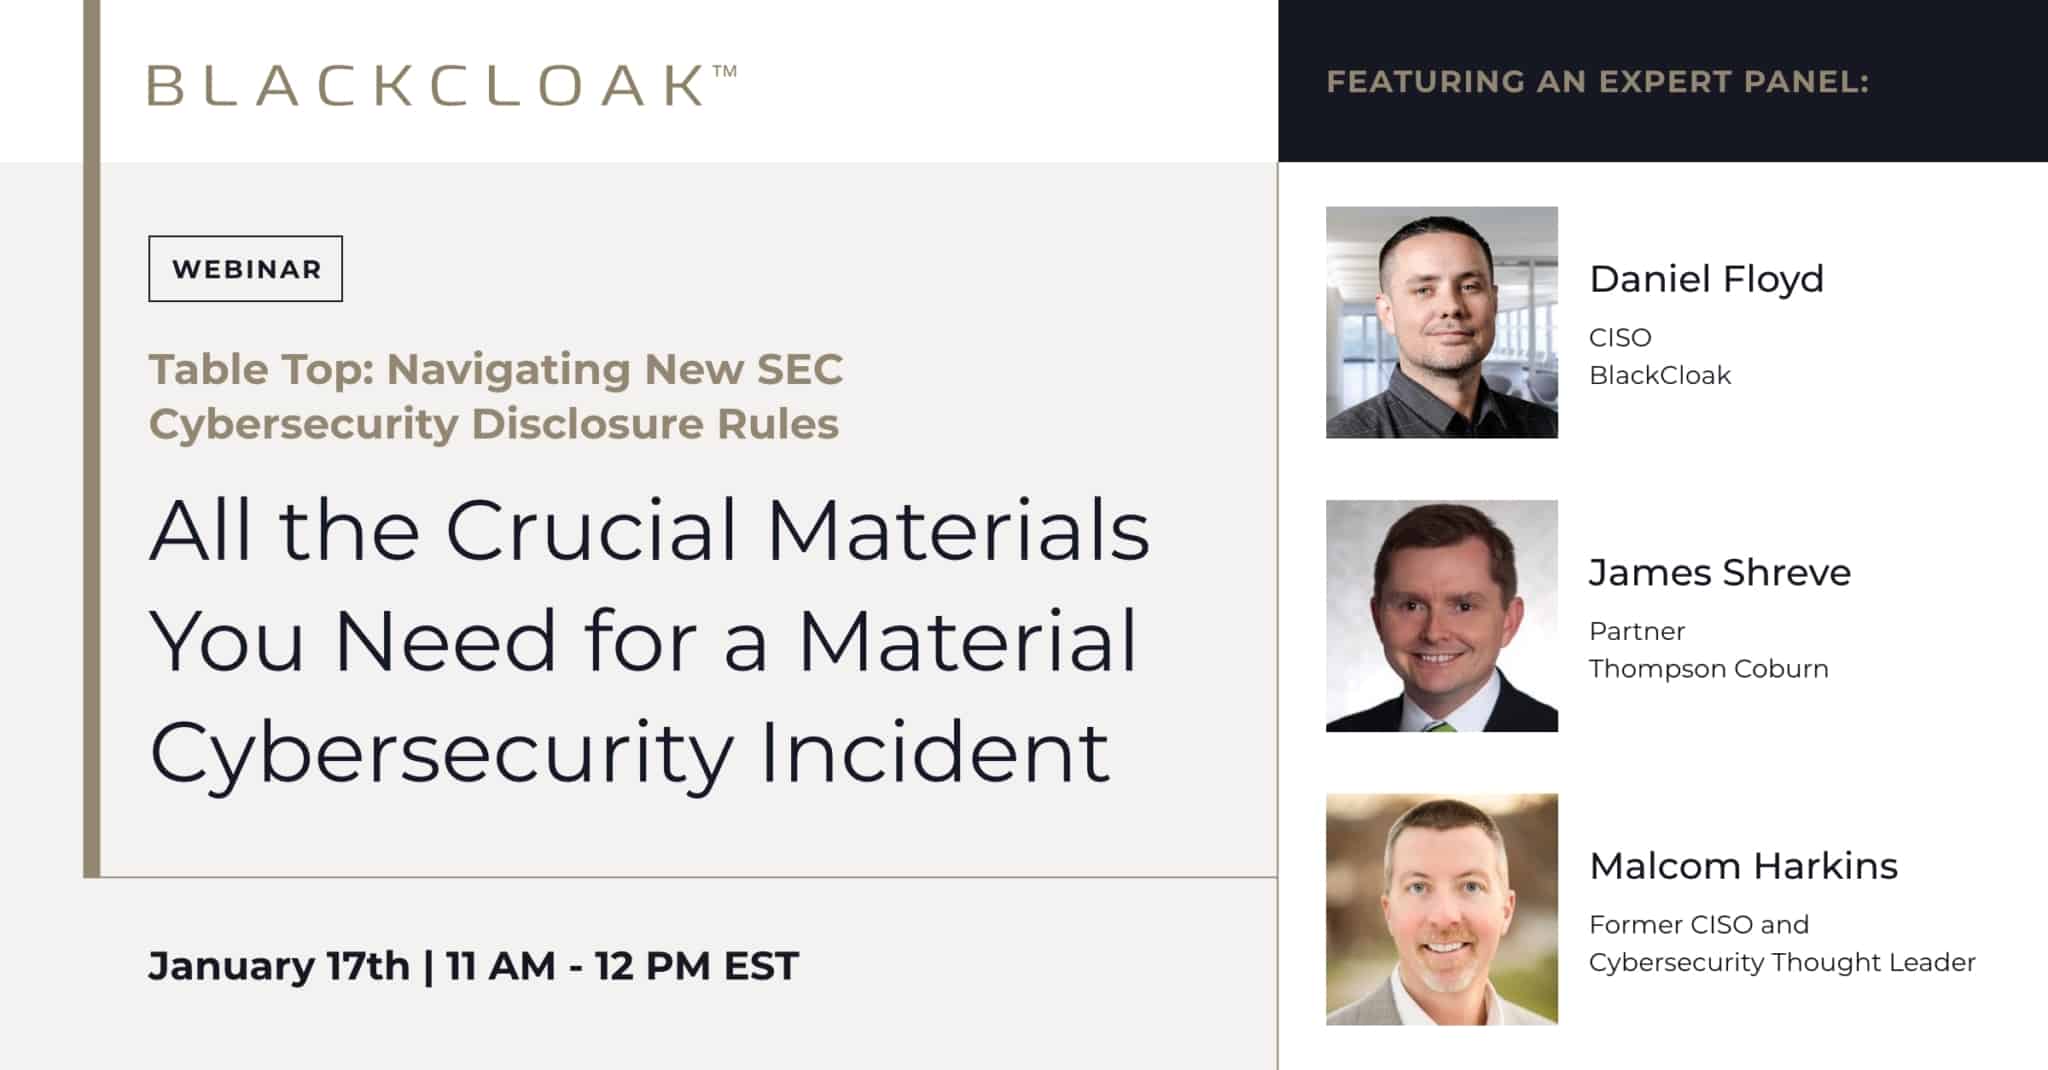 All the crucial materials you need for a material cybersecurity incident